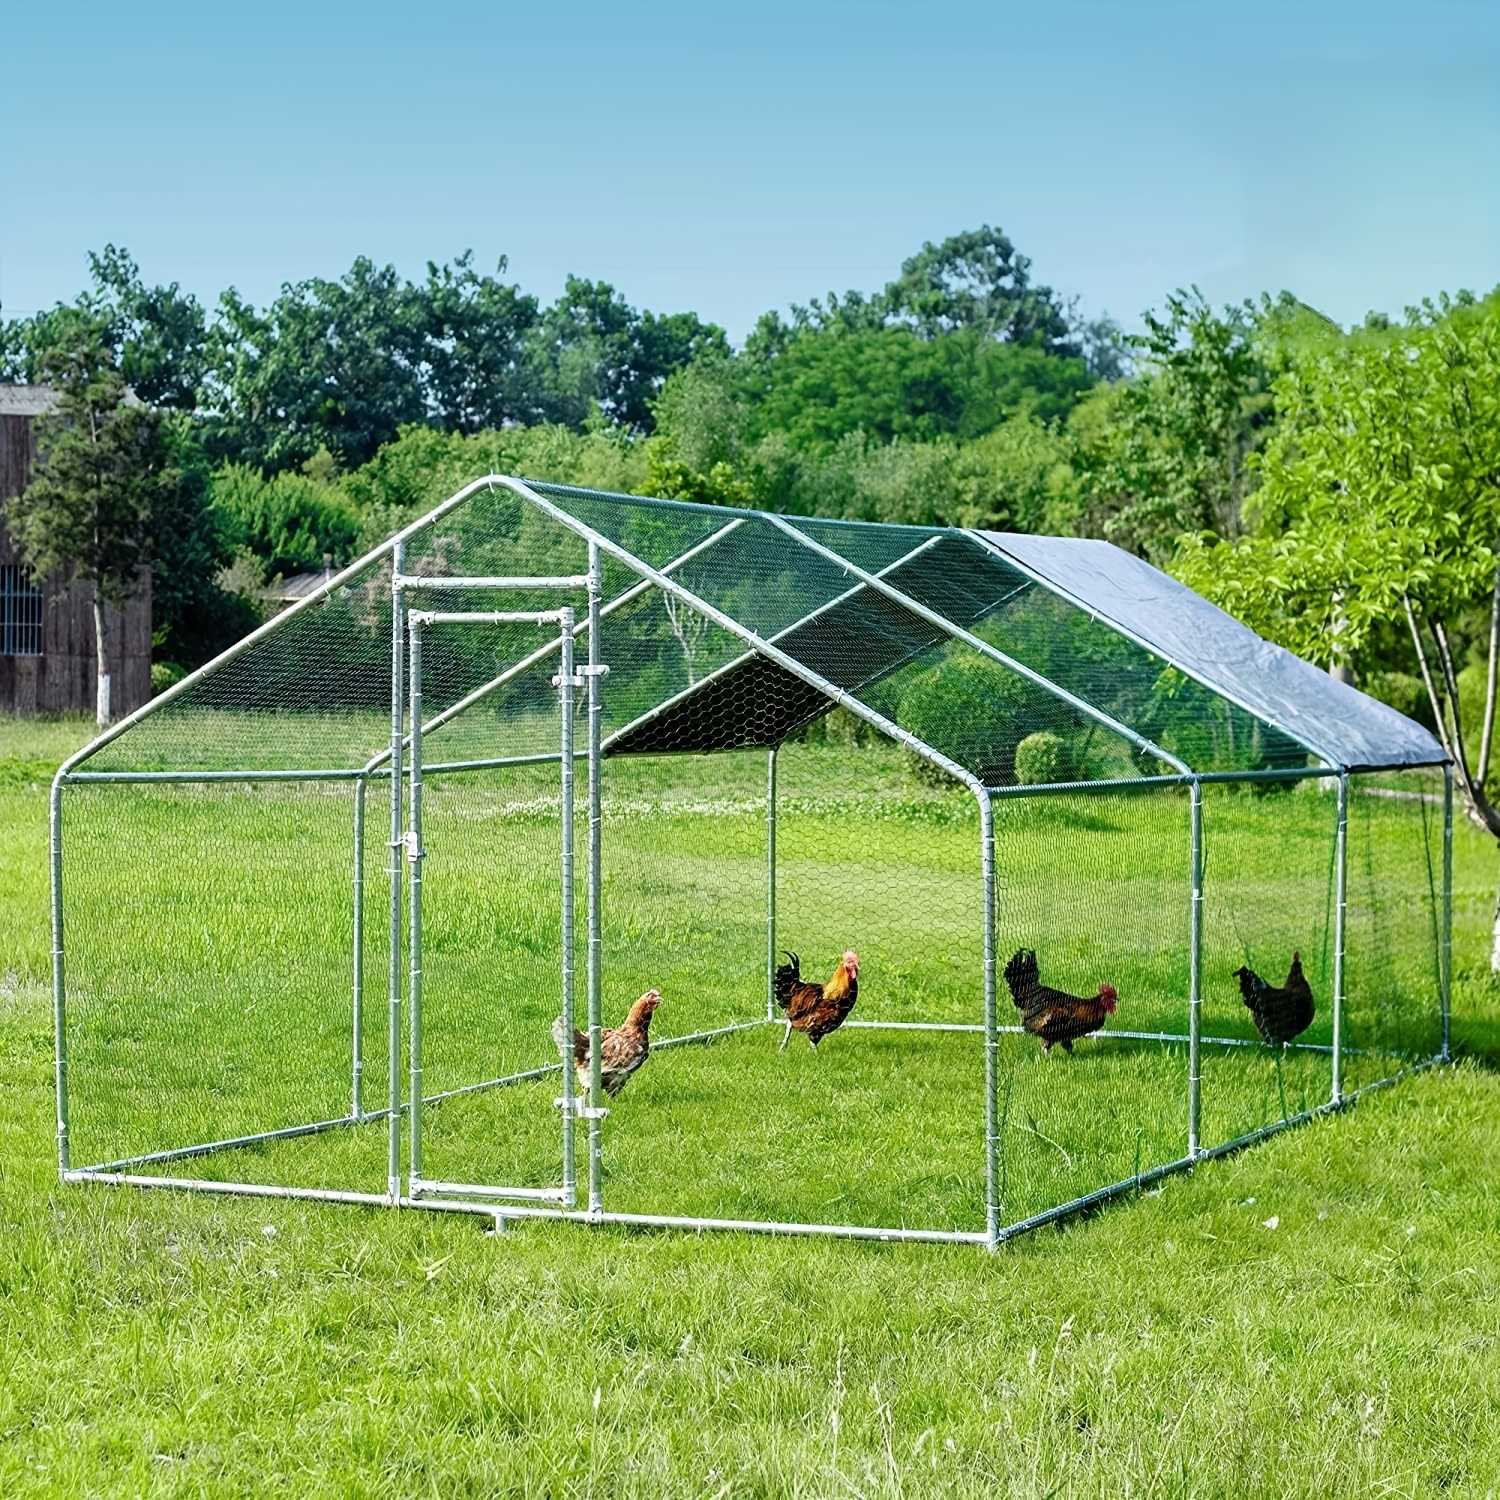 

Hittite Extra Large Metal Chicken Coop, Walk-in Poultry Chicken Coops For 10 Chickens, Heavy Duty In For Yard With Waterproof Cover And Secure Lock